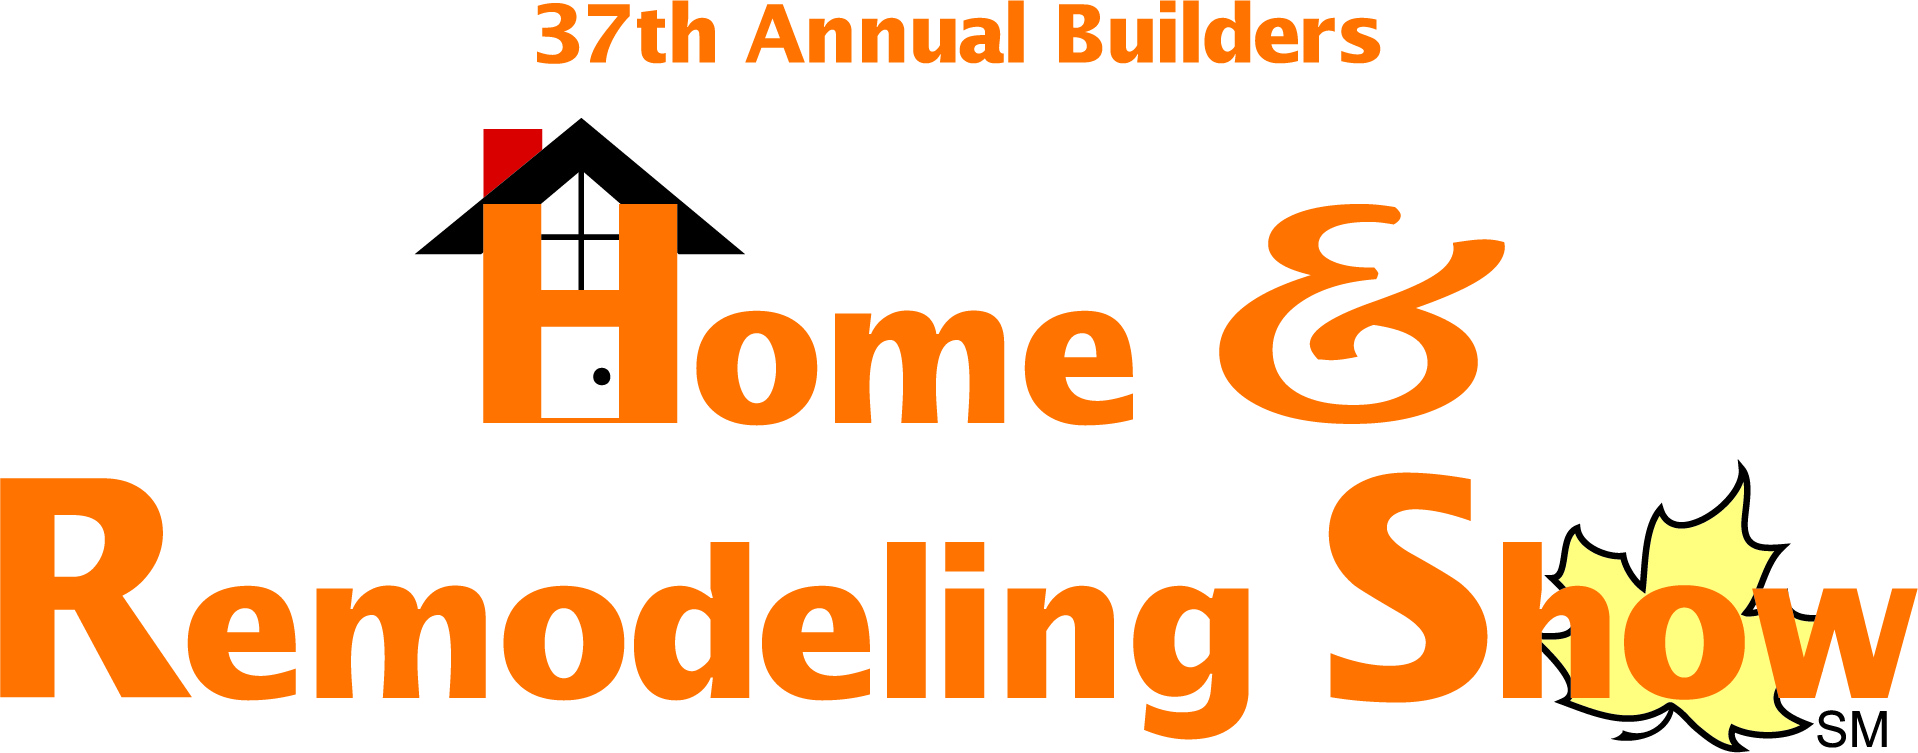 37th Annual Builders Home & Remodeling Show